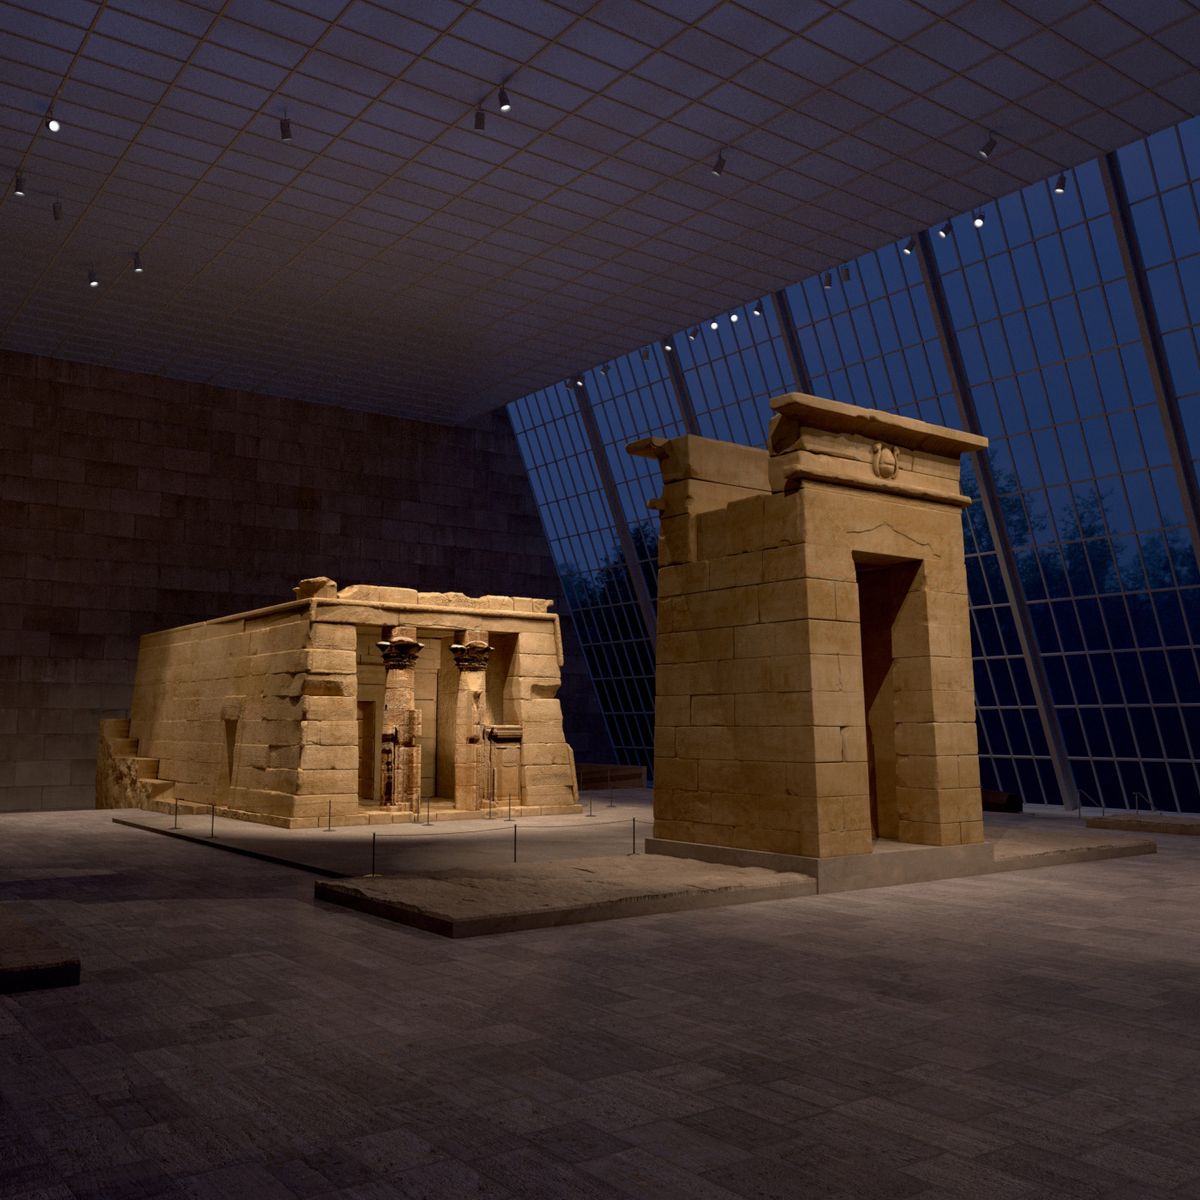 The Temple of Dendur, as experienced through the Metropolitan Museum of Art's new virtual and gaming experience Courtesy of the Metropolitan Museum of Art and Verizon